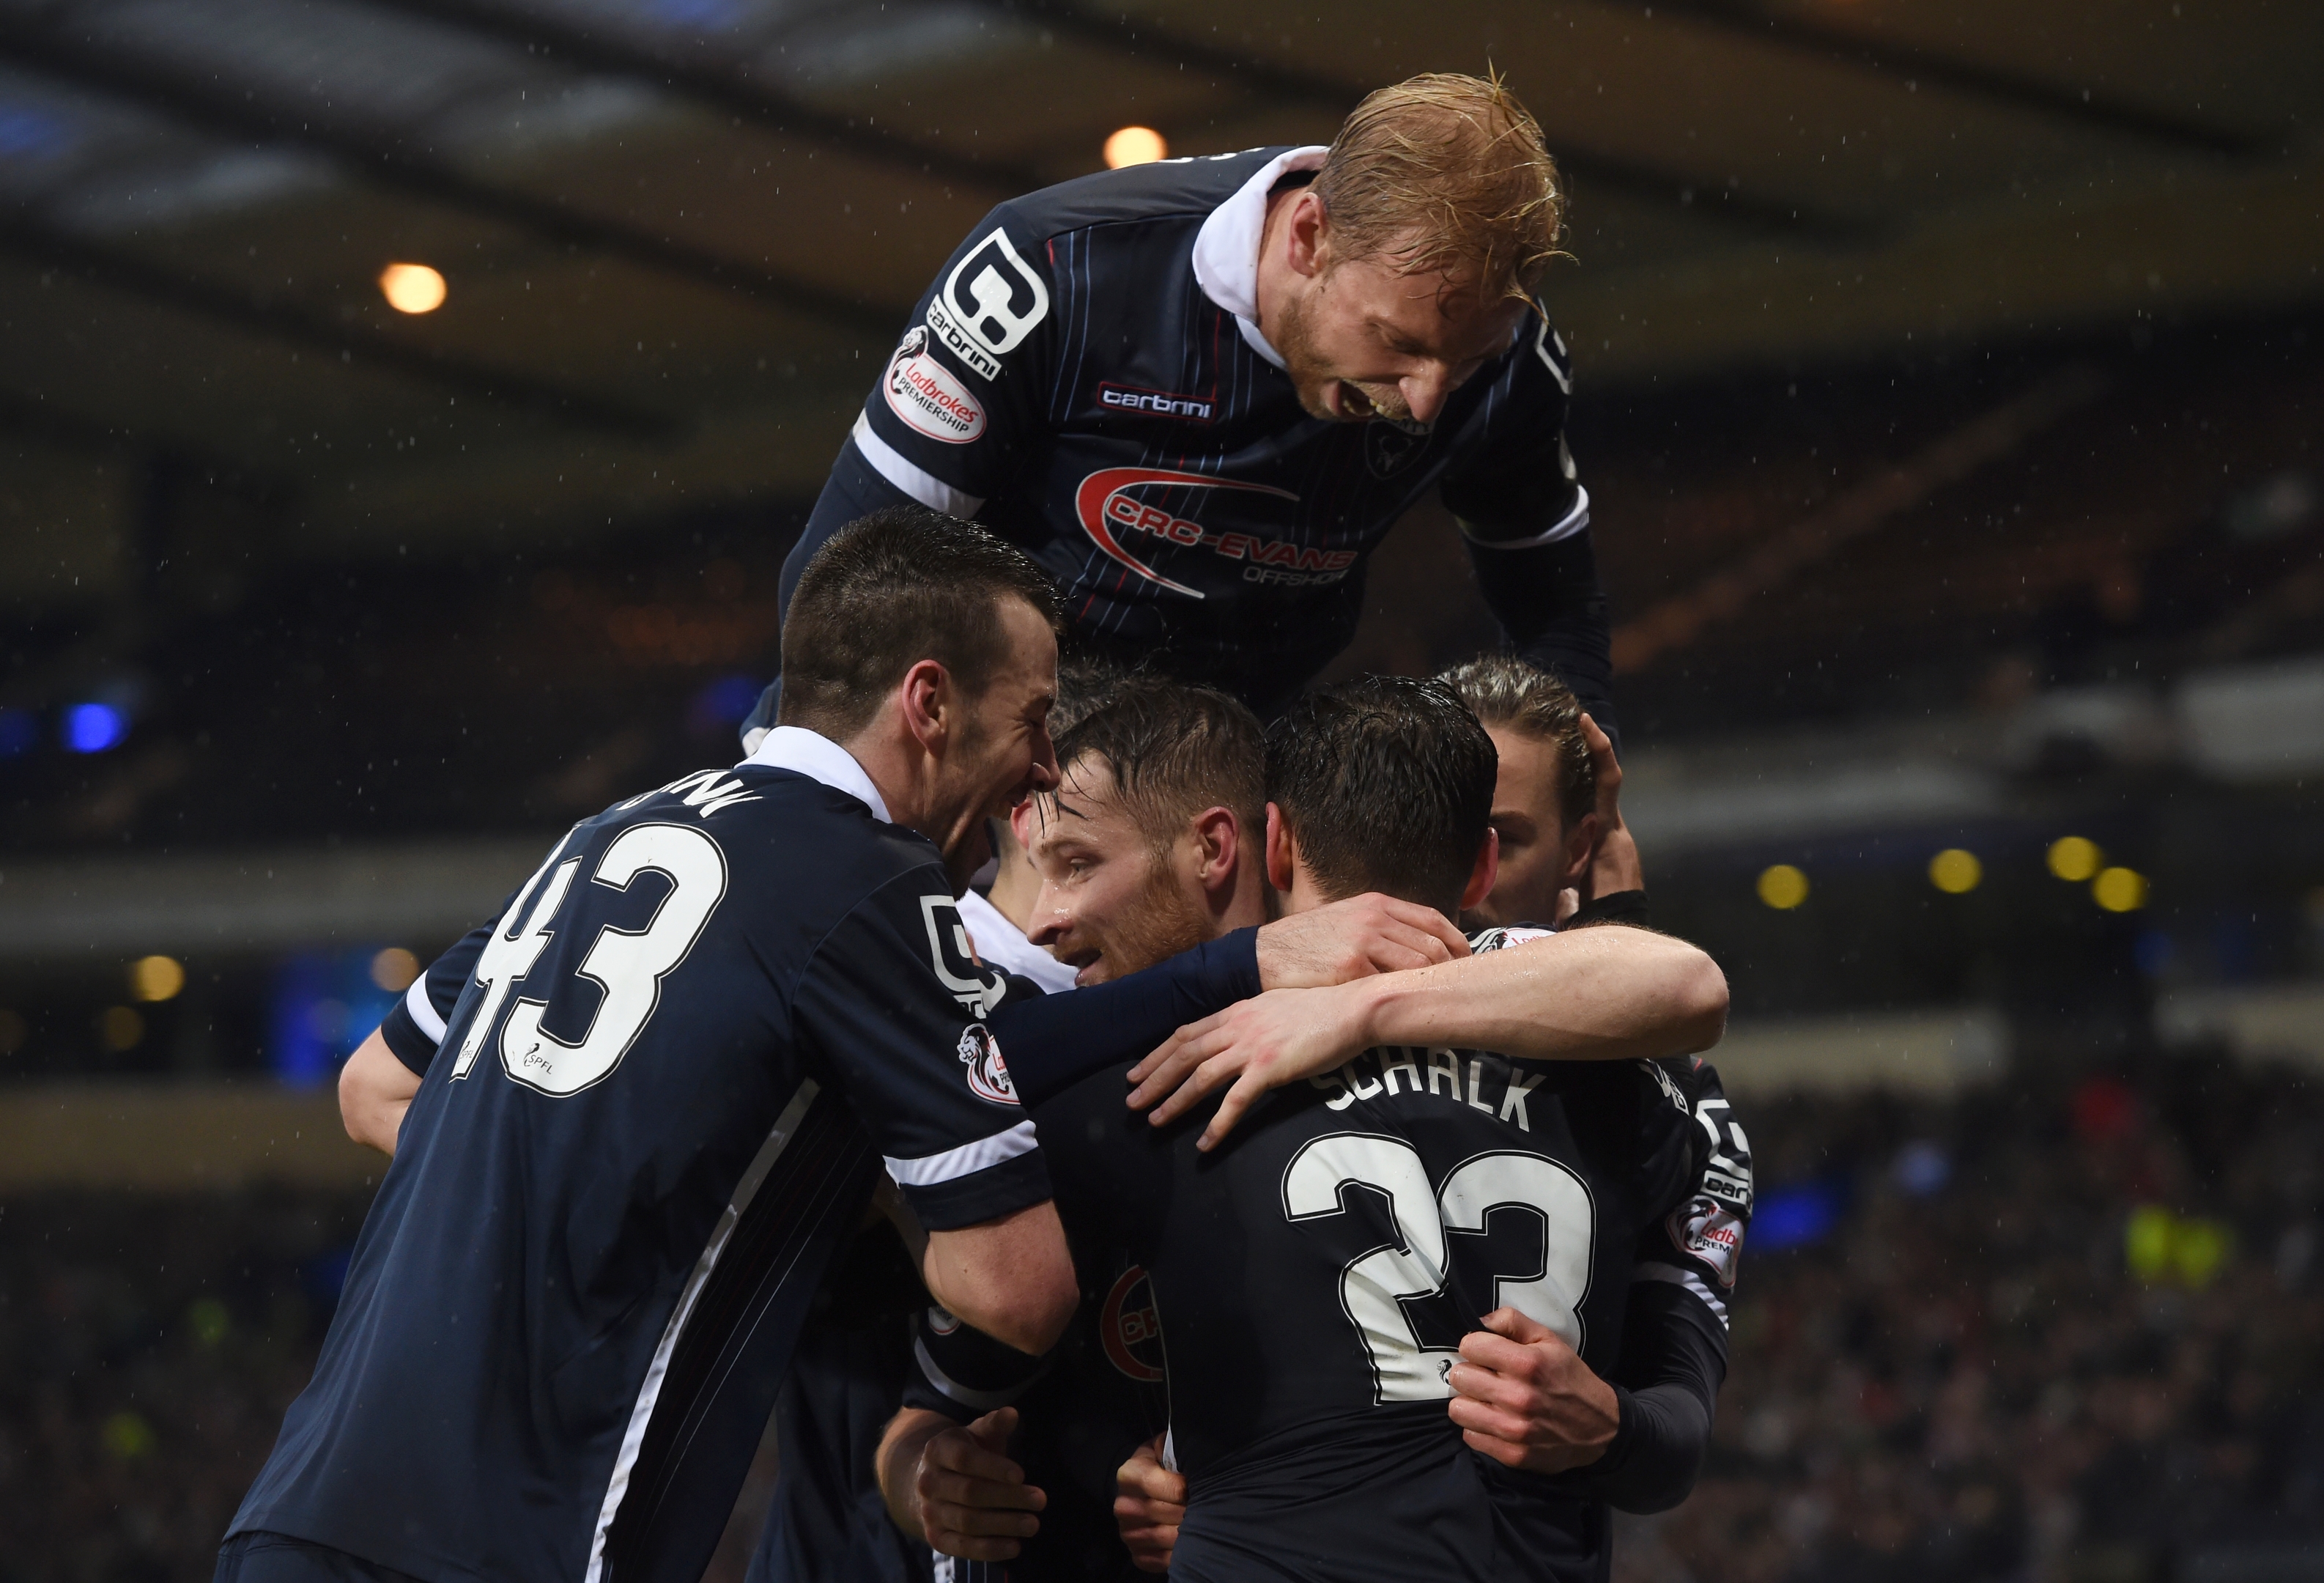 Ross County beat Celtic on their way to 2016 League Cup glory.